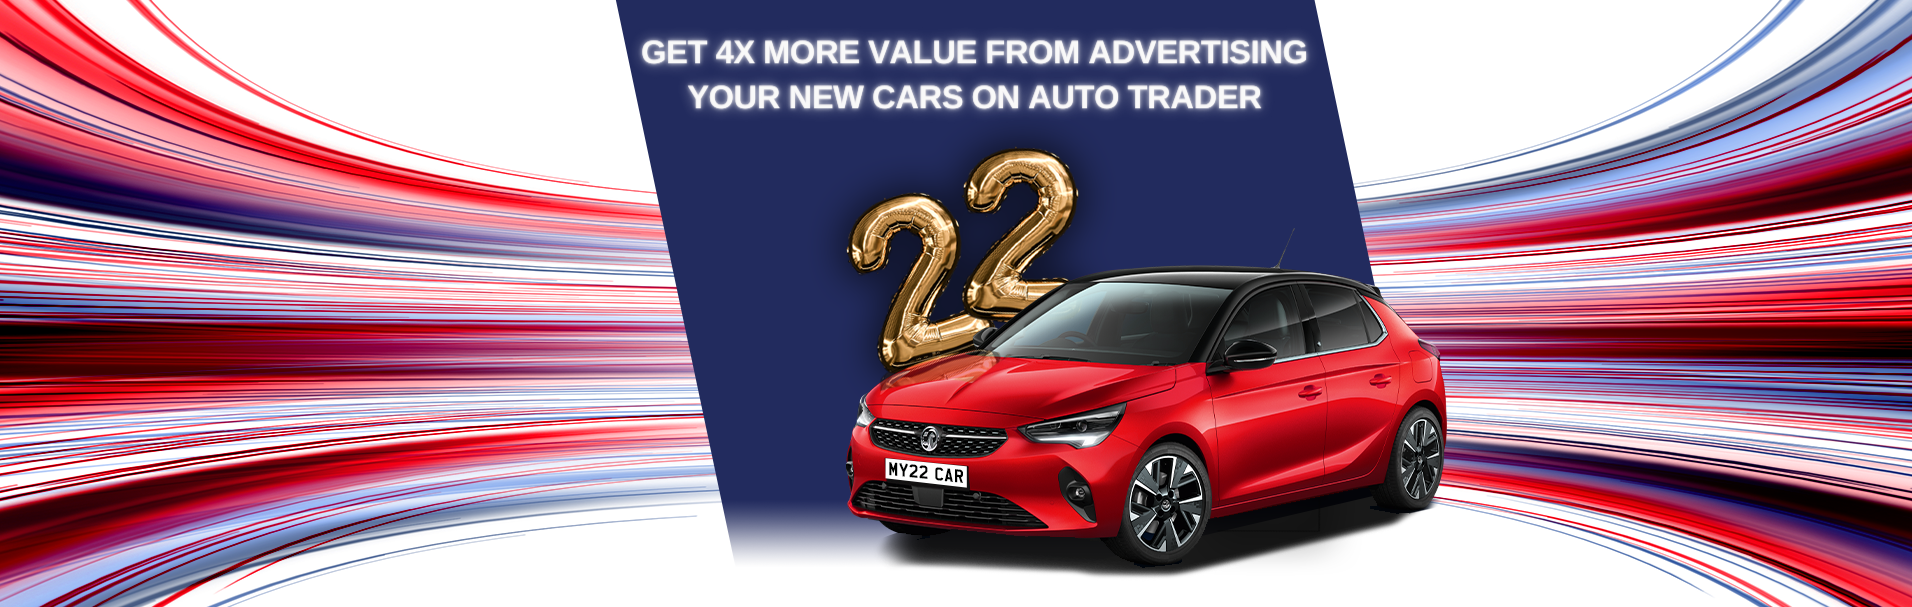 Auto Trader UK - New and Used Cars For Sale